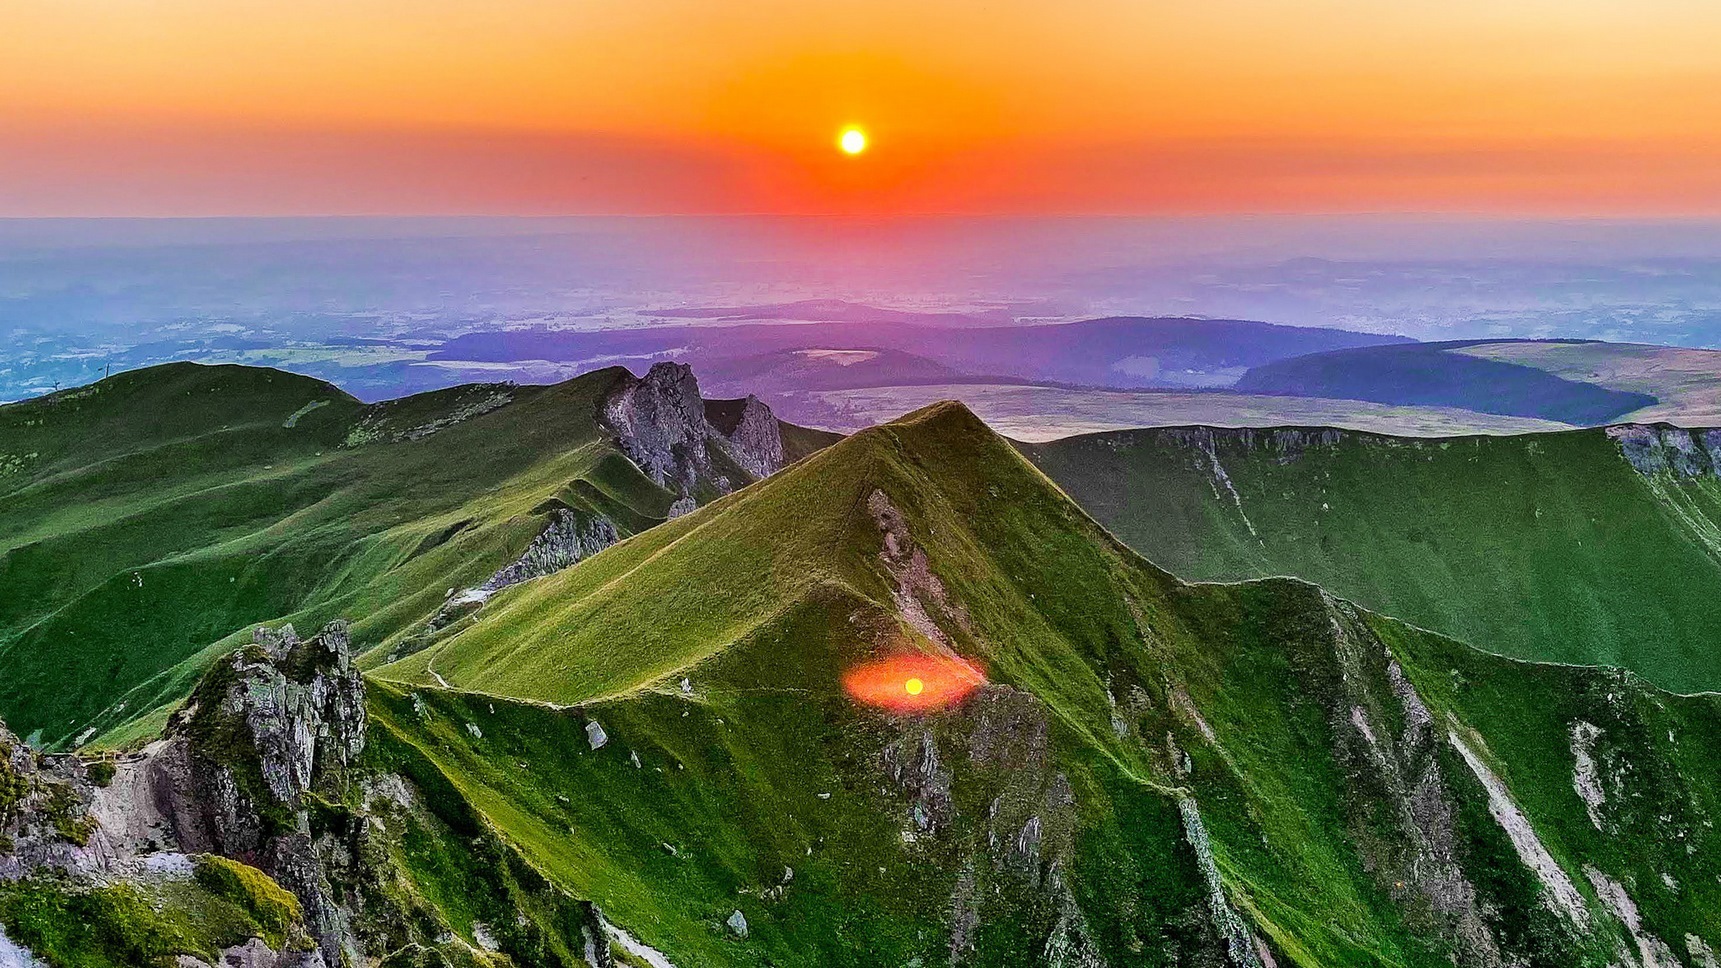 At the top of Puy de Sancy, summer sunset